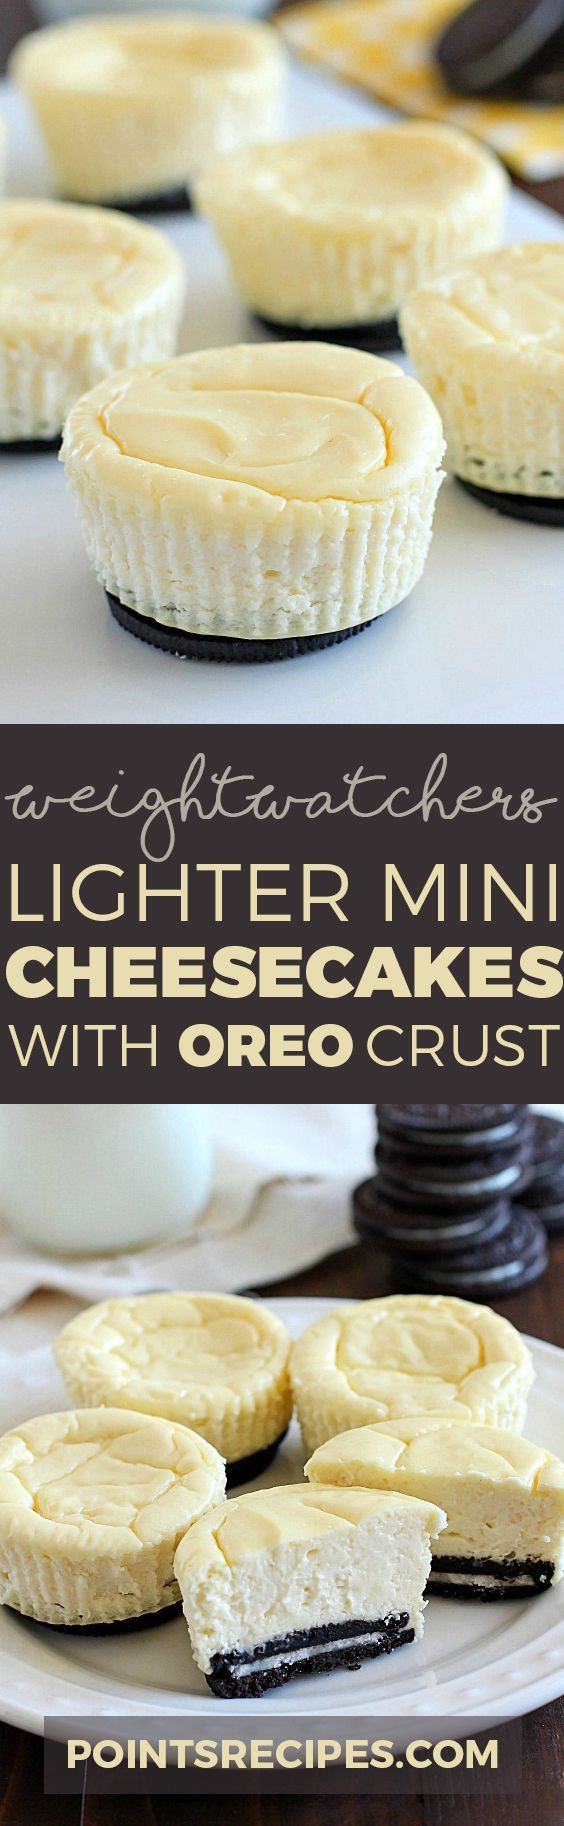 Lighter Mini Cheesecakes with Oreo Crust (Weight Watchers SmartPoints)